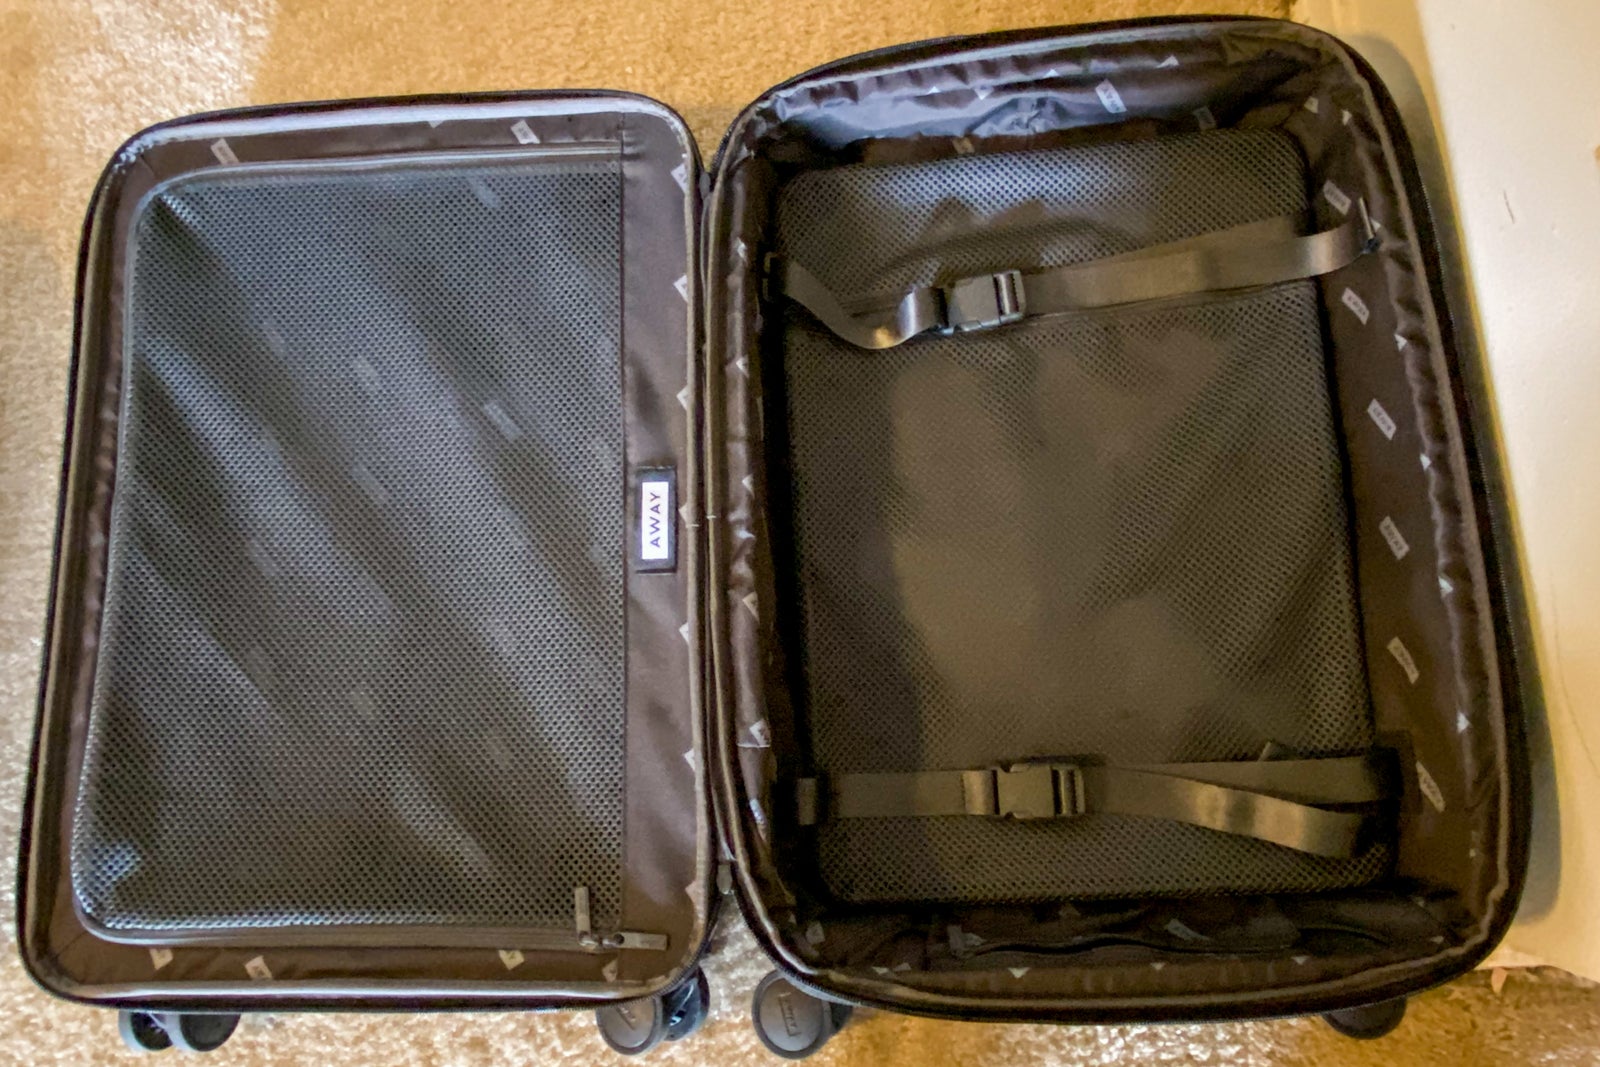 Luggage review: Away The Bigger Carry-On - The Points Guy